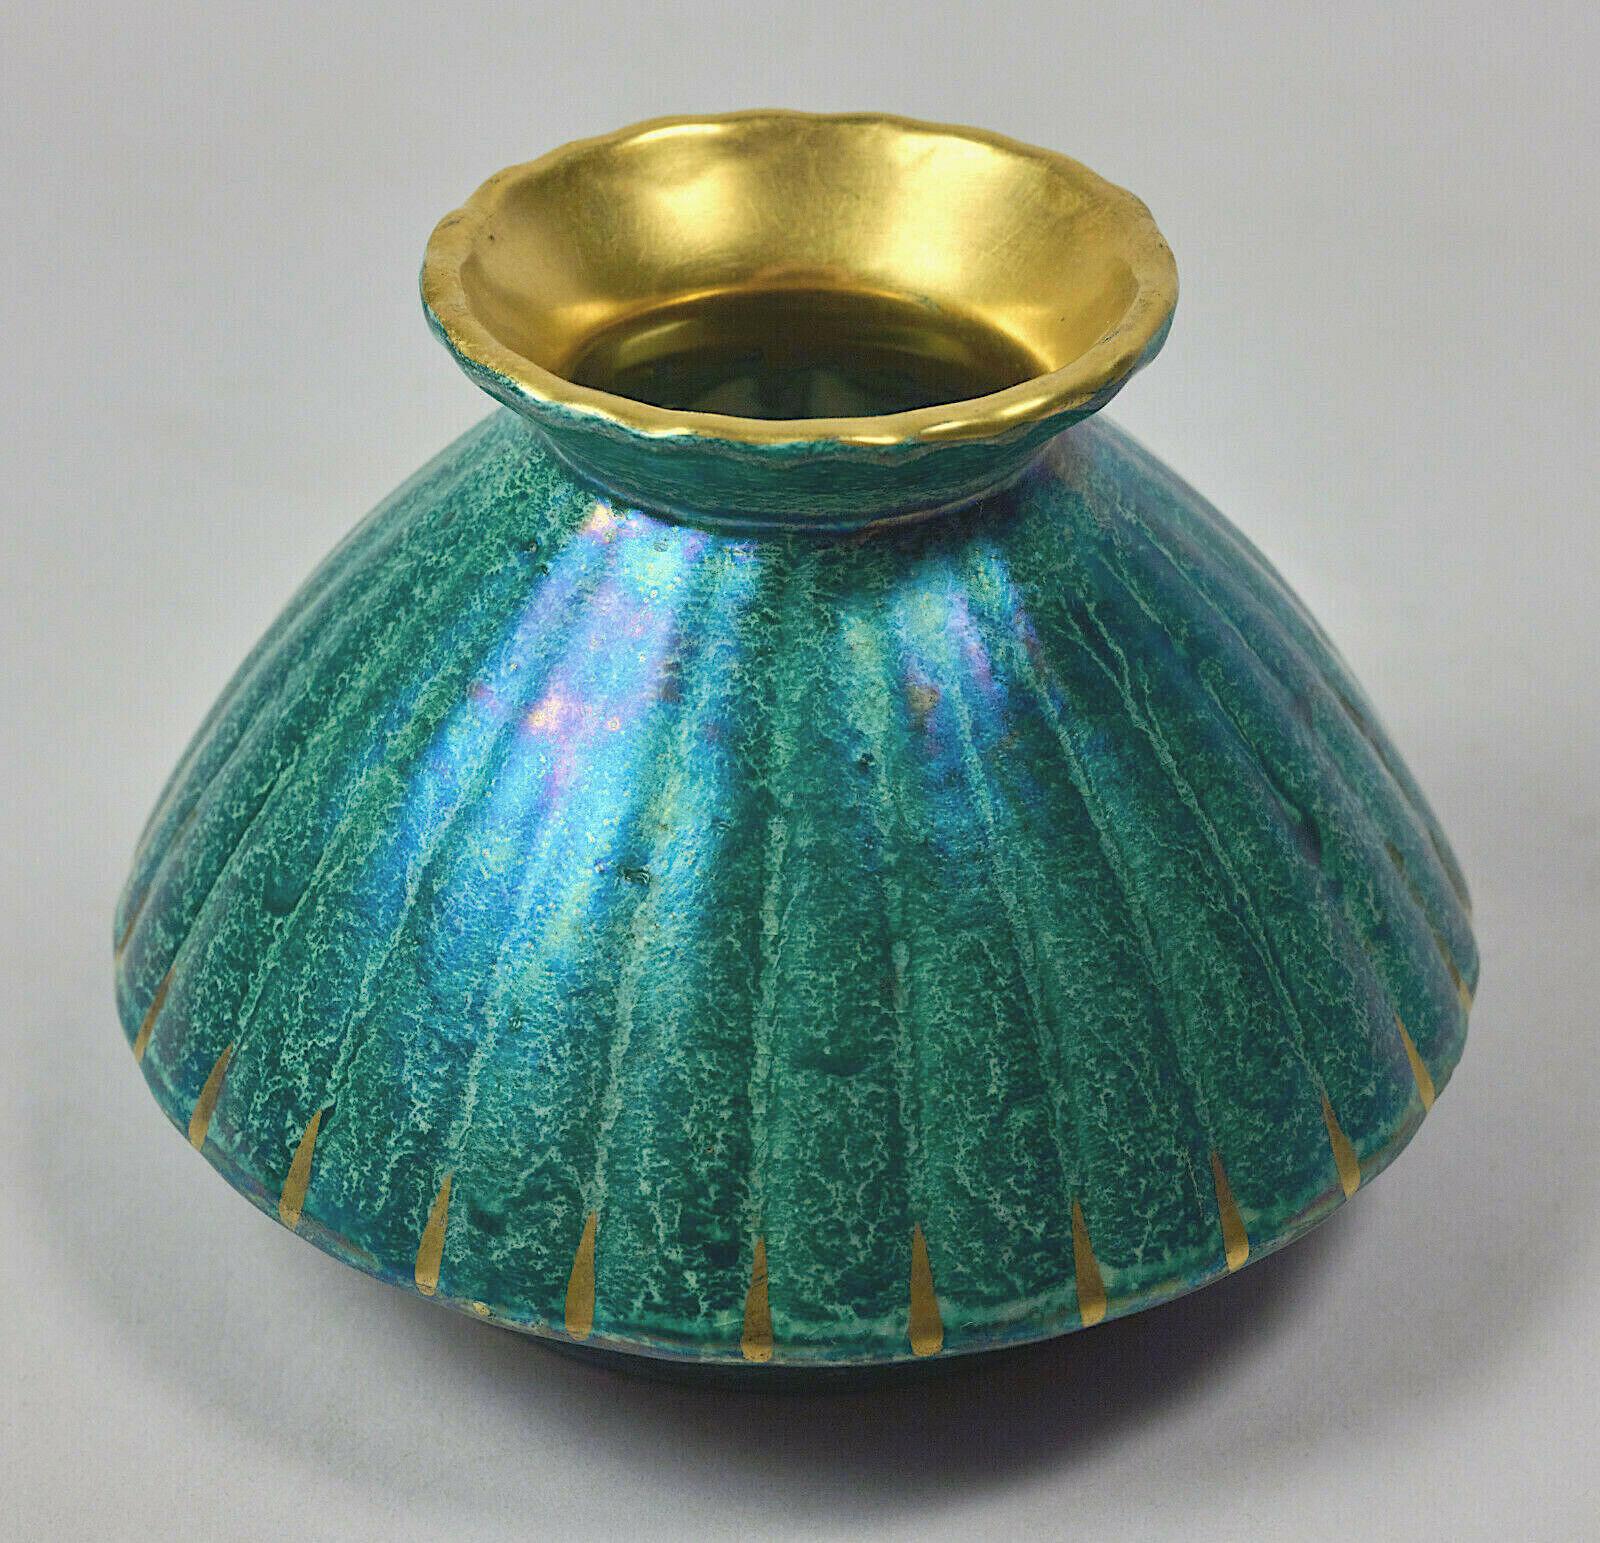 A Josef Ekberg (1877-1945) Scandinavian Art Deco cabinet vase from the Gustavsberg Porcelain Factory of Sweden, produced during the second quarter of the 20th century. The ribbed vase is decorated with a striking iridescent luster glaze of marbled